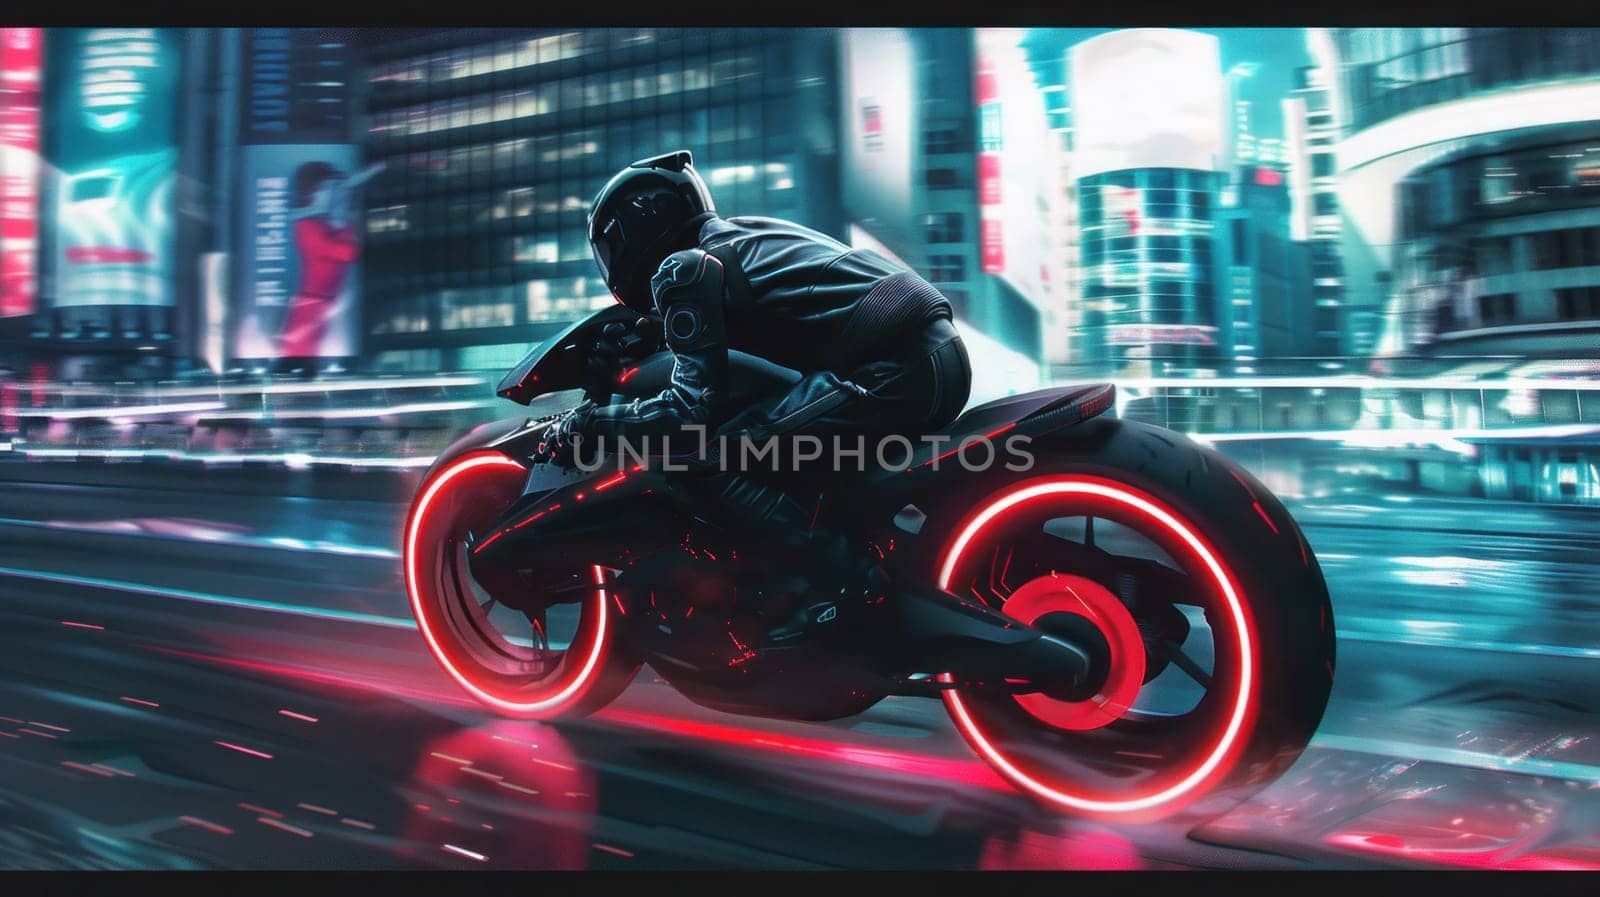 Night ride through the city with neon lights on wheels a stylish and exciting urban adventure